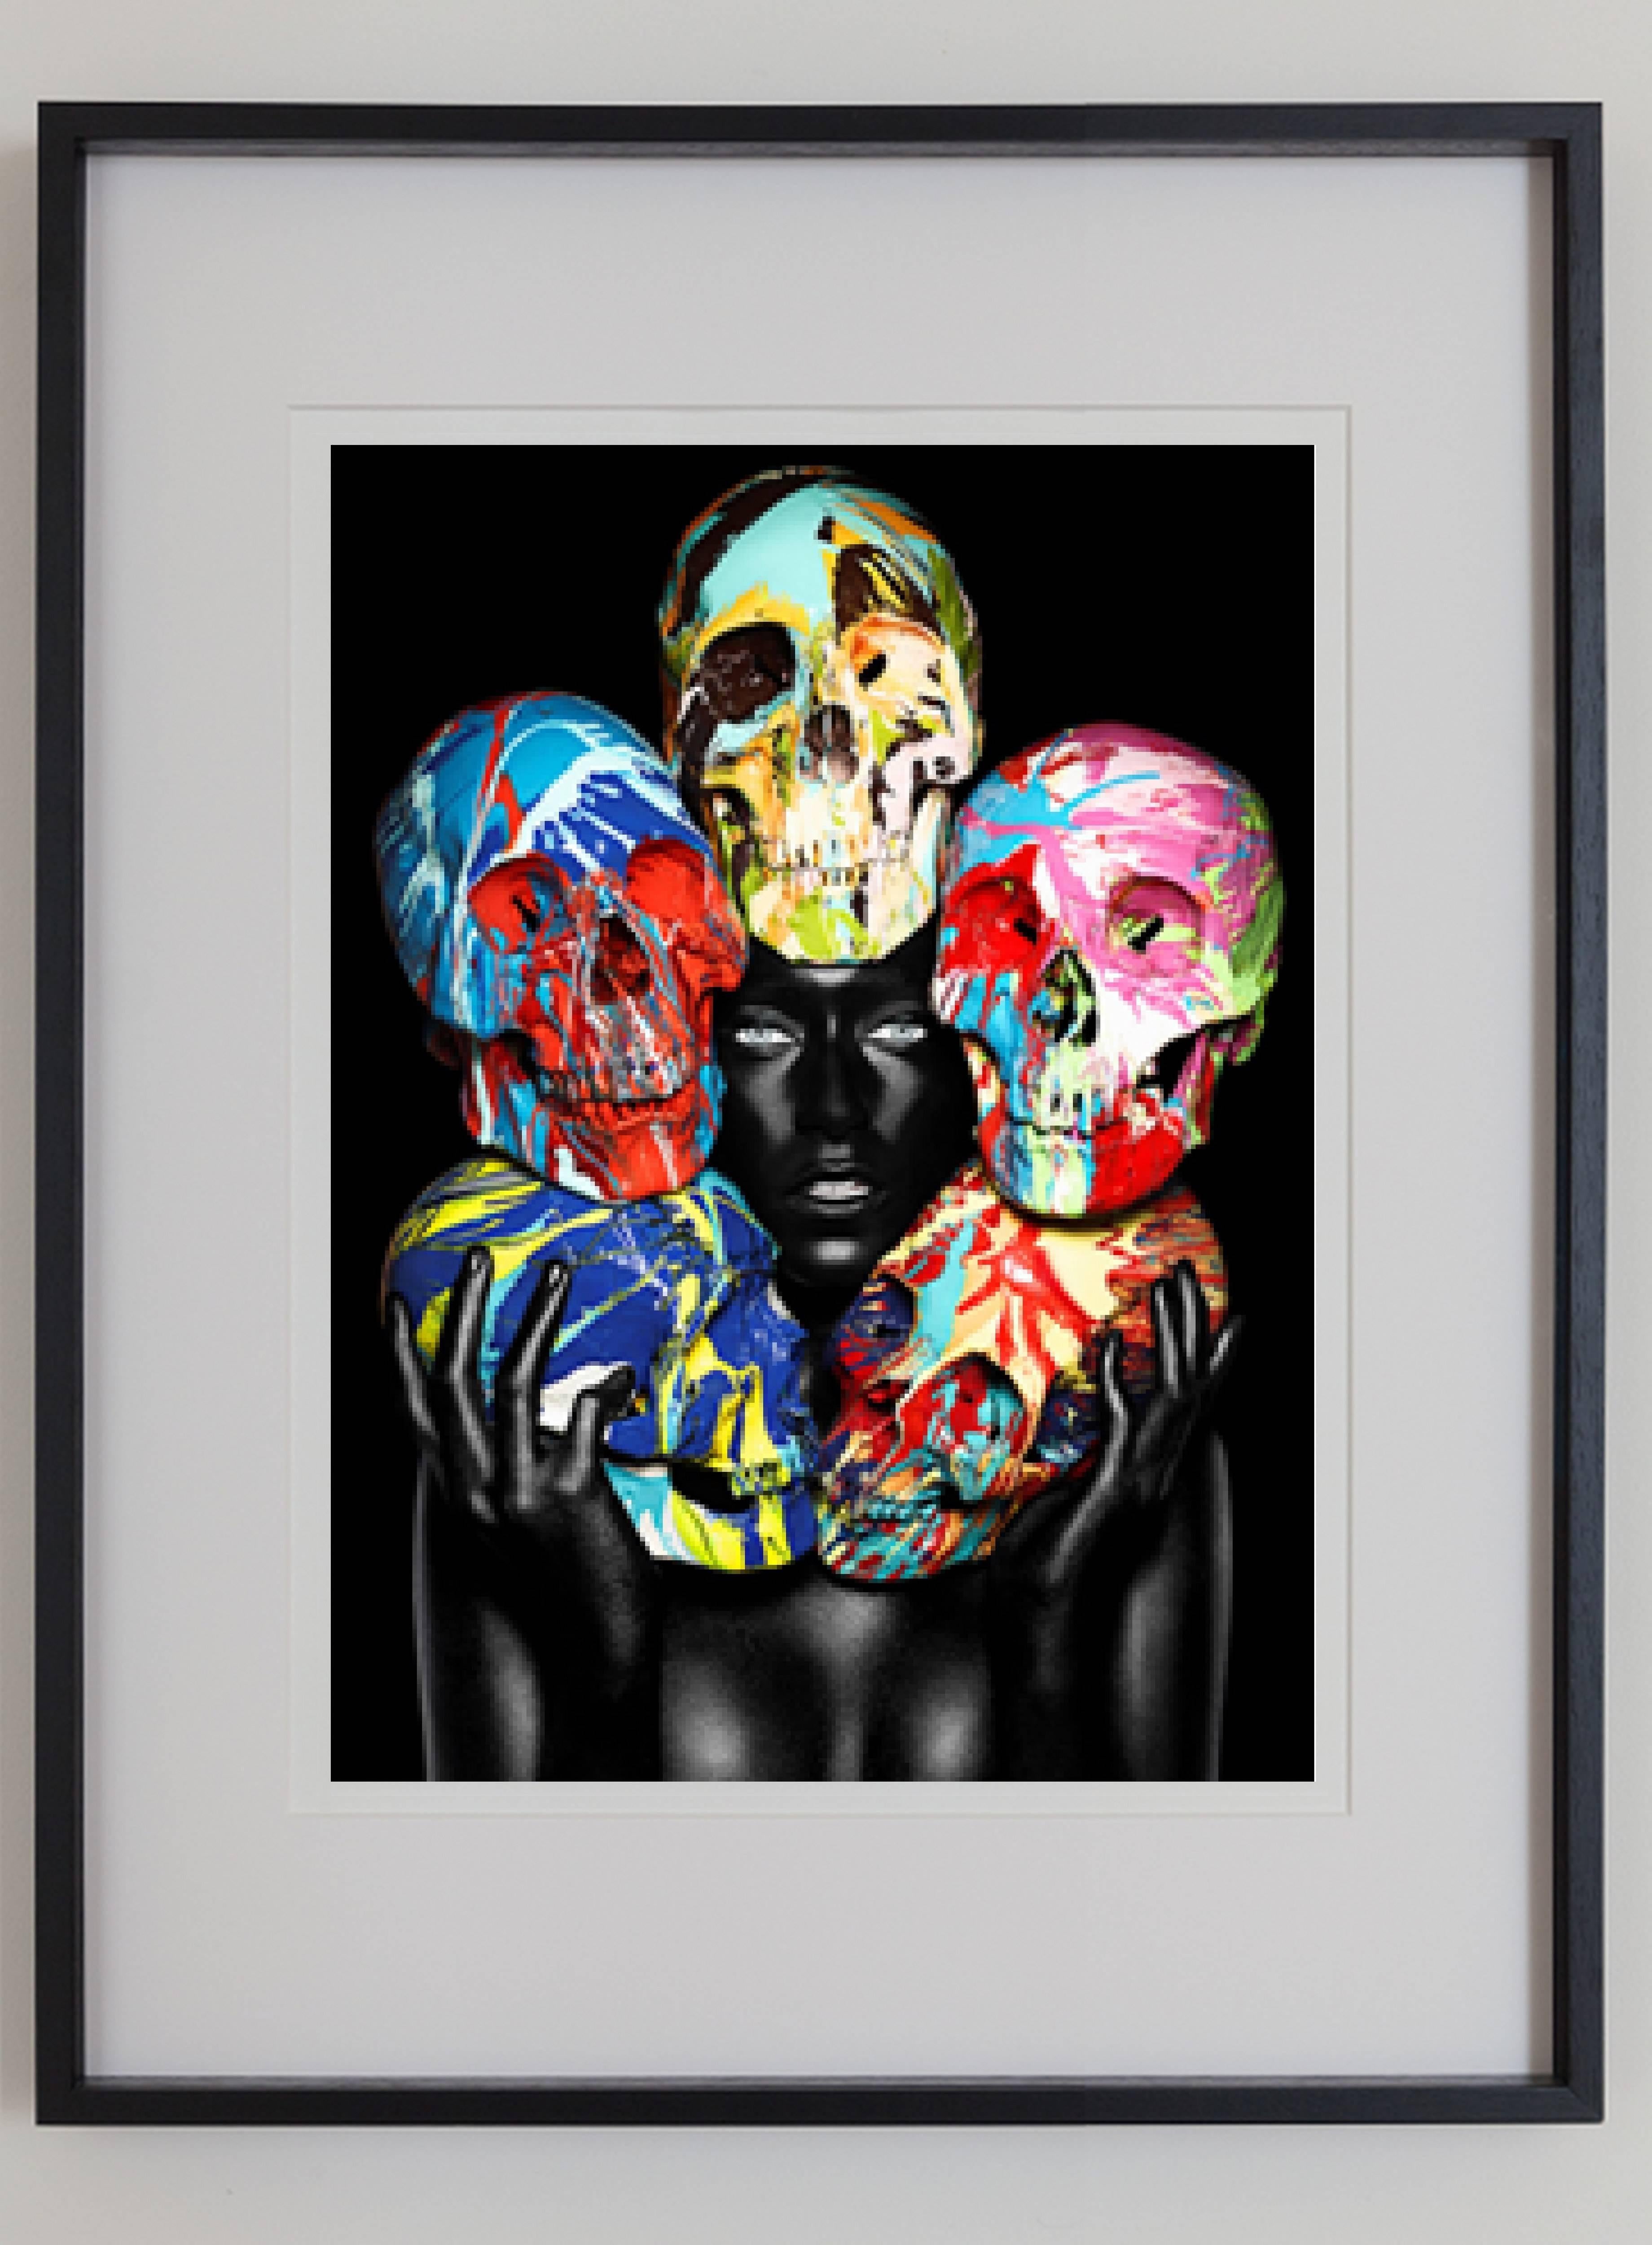 Painted Skulls / Eyes open - Photograph by Rankin and Damien Hirst